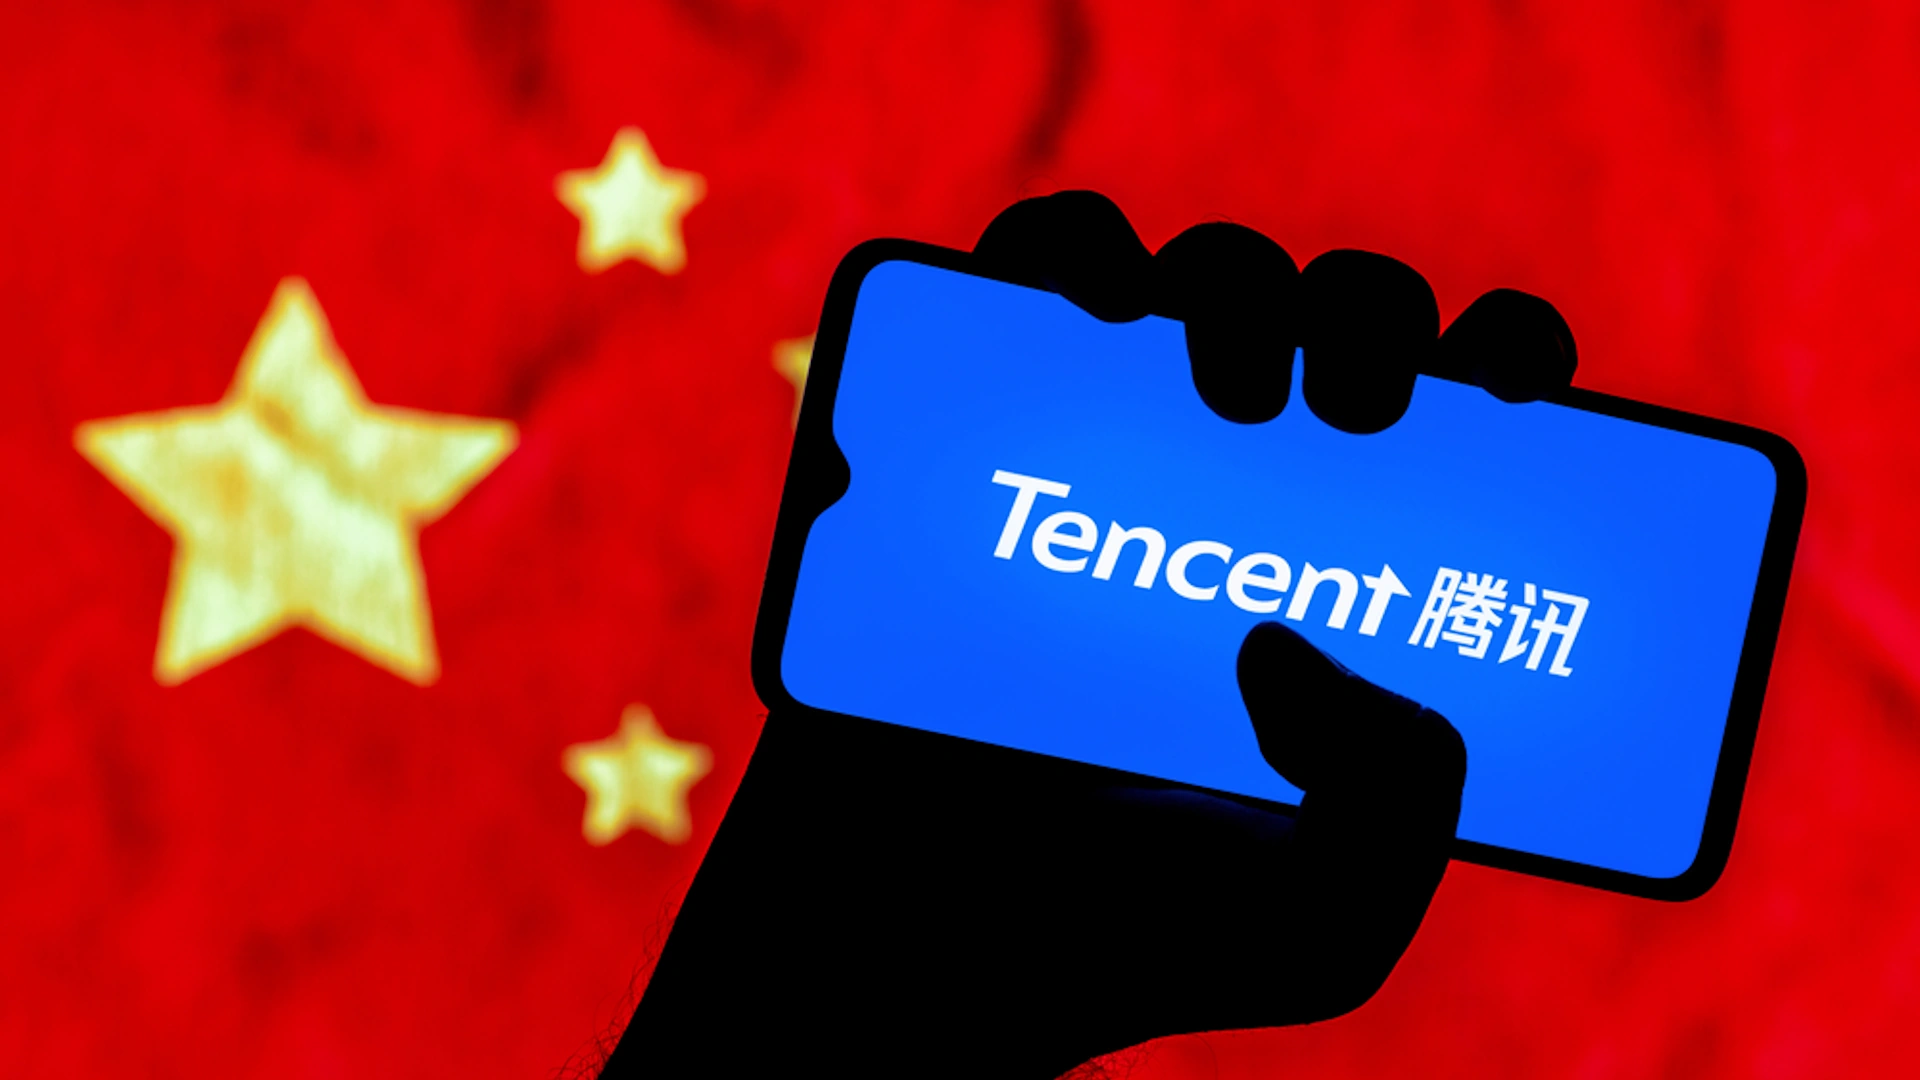 Tencent gaming business threatened, but developing in artificial intelligence